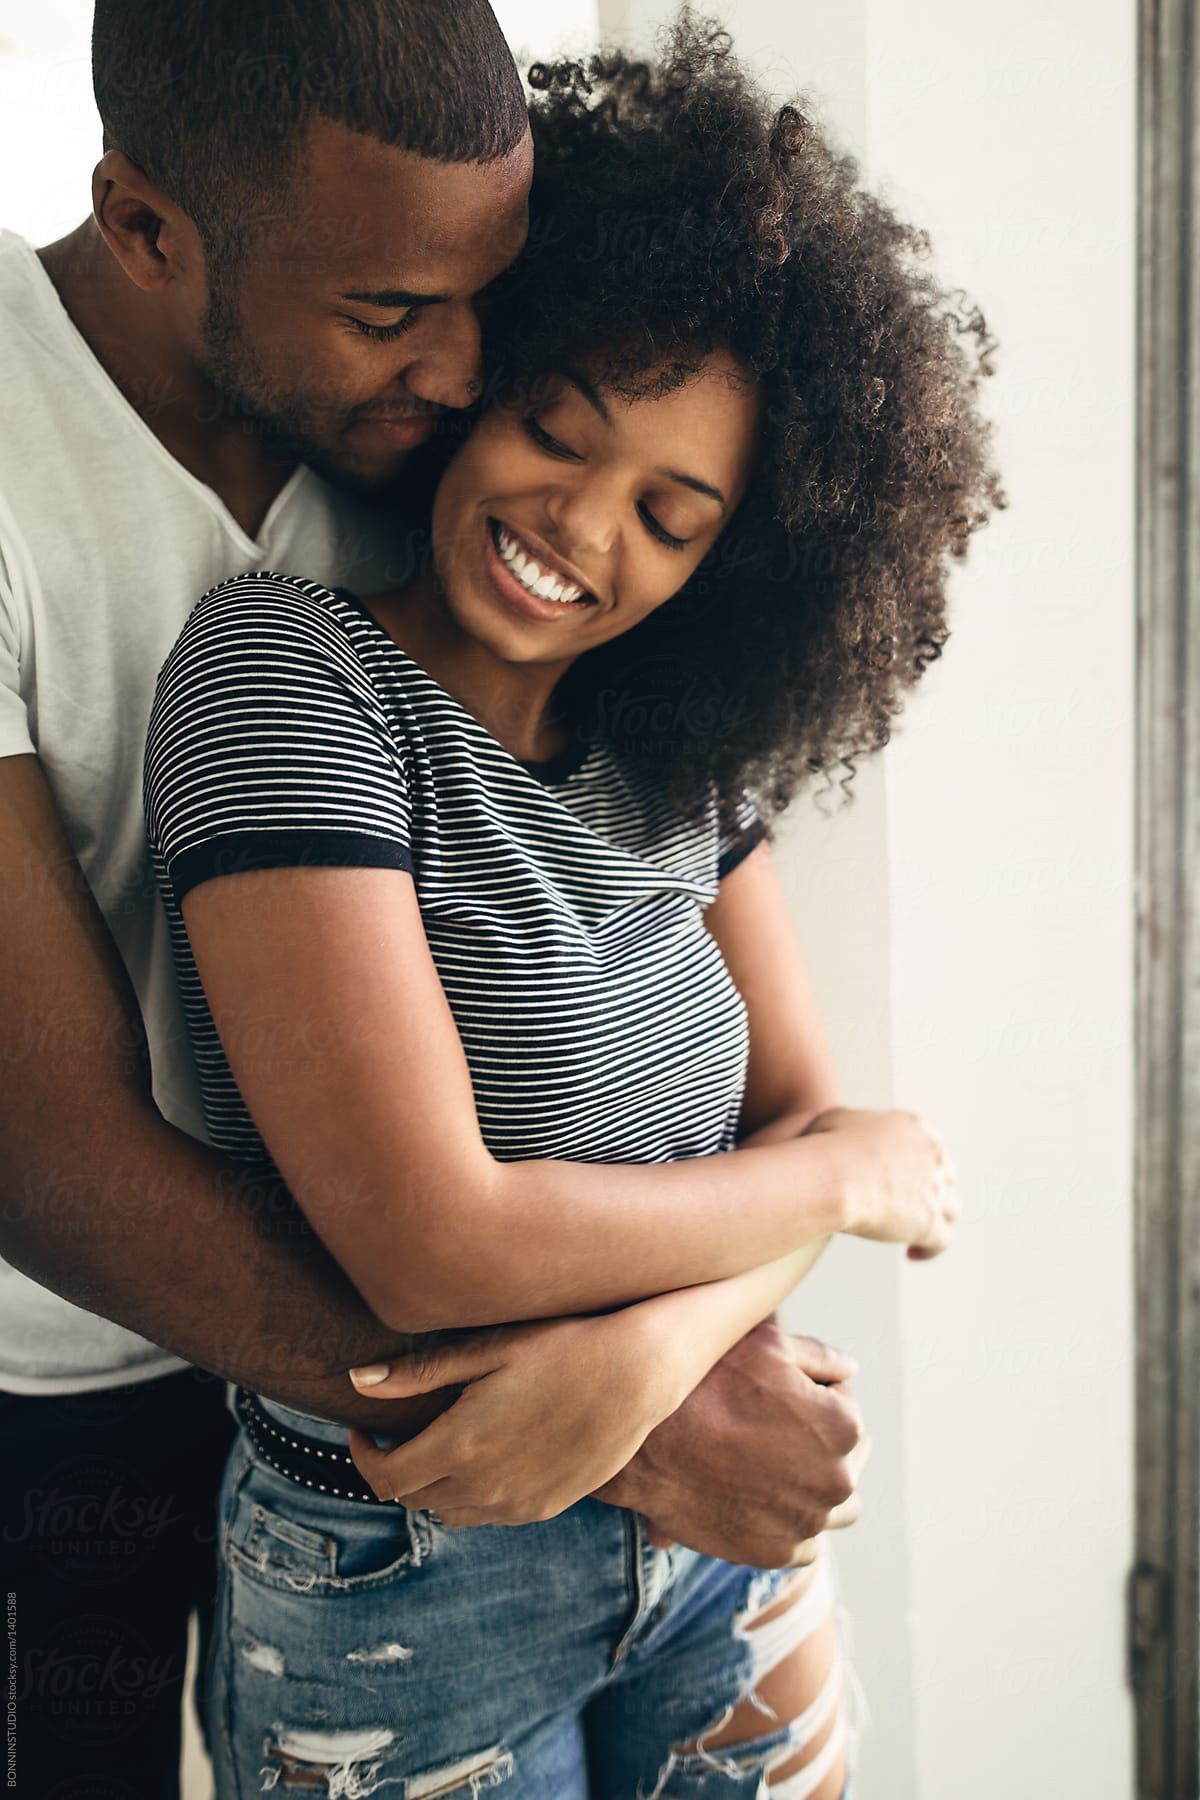 The Rarest Secrets of Happy Couples: Top 6 Tips - California